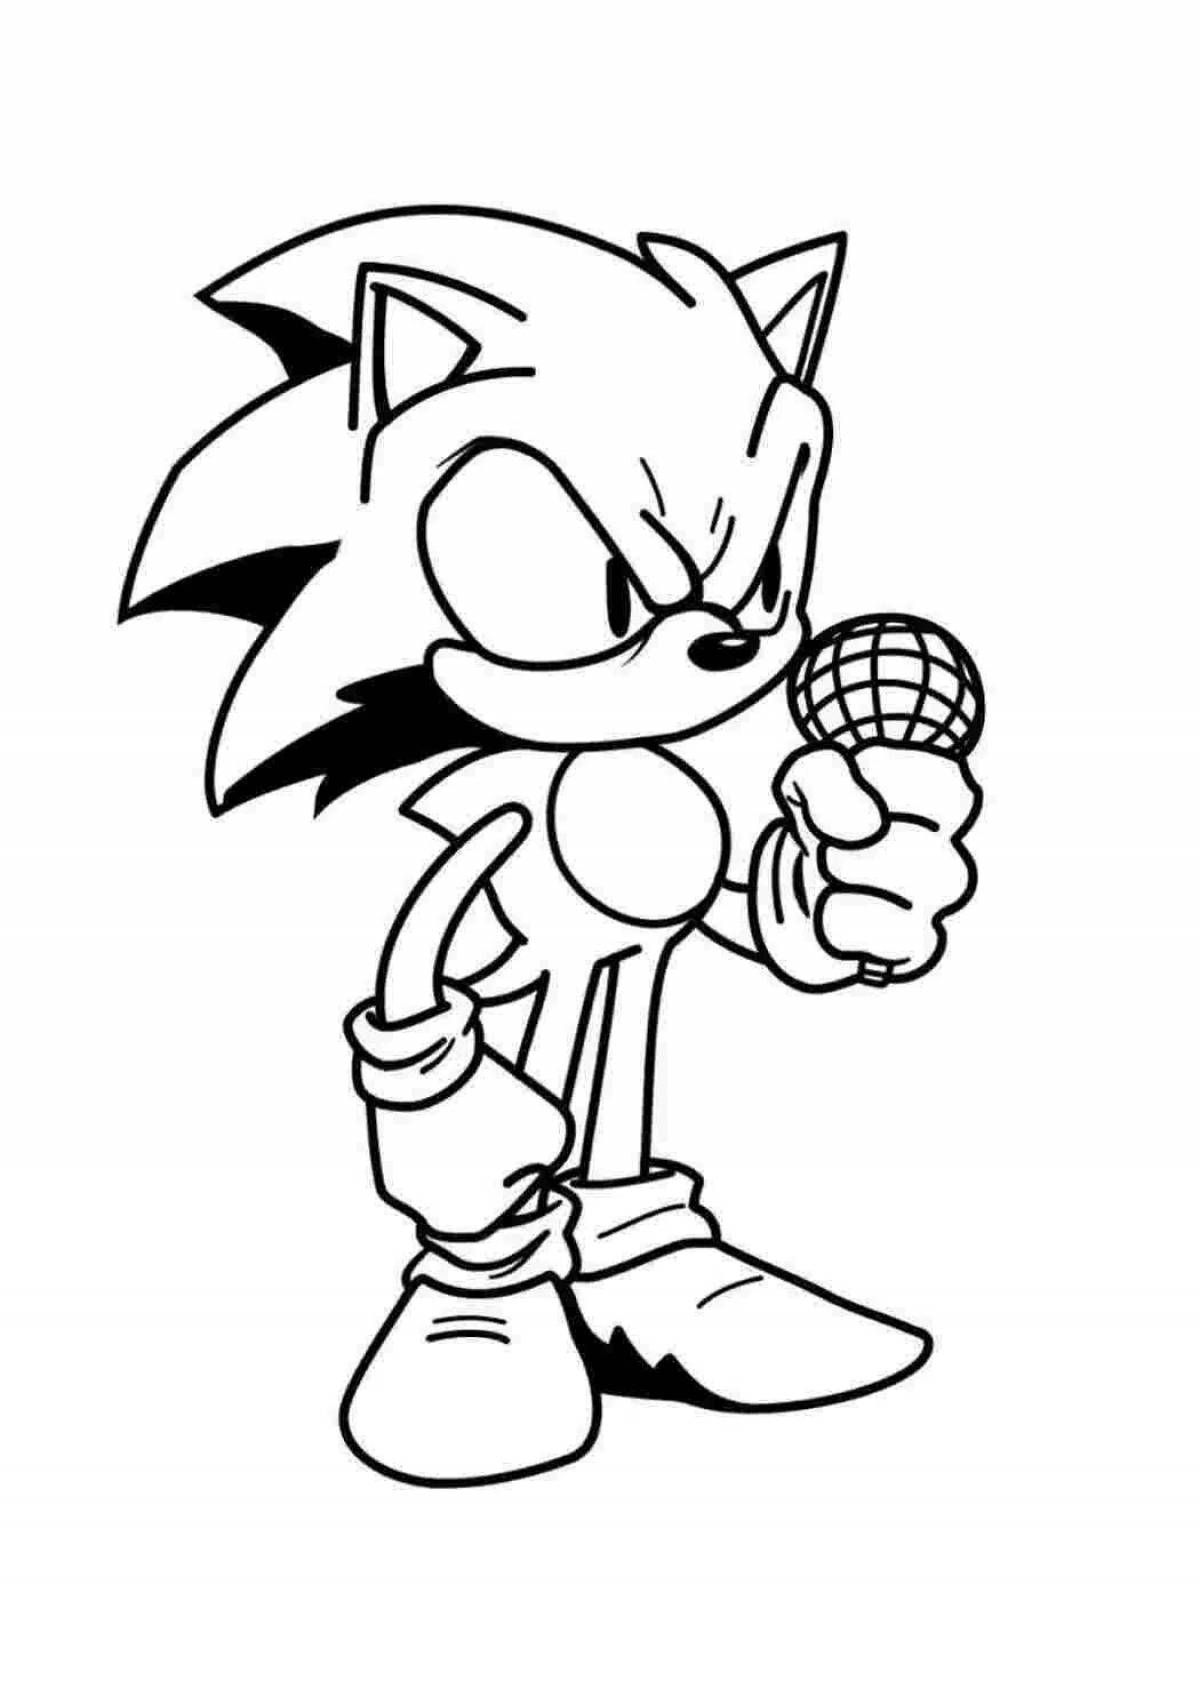 Sonicexe fnf fat coloring